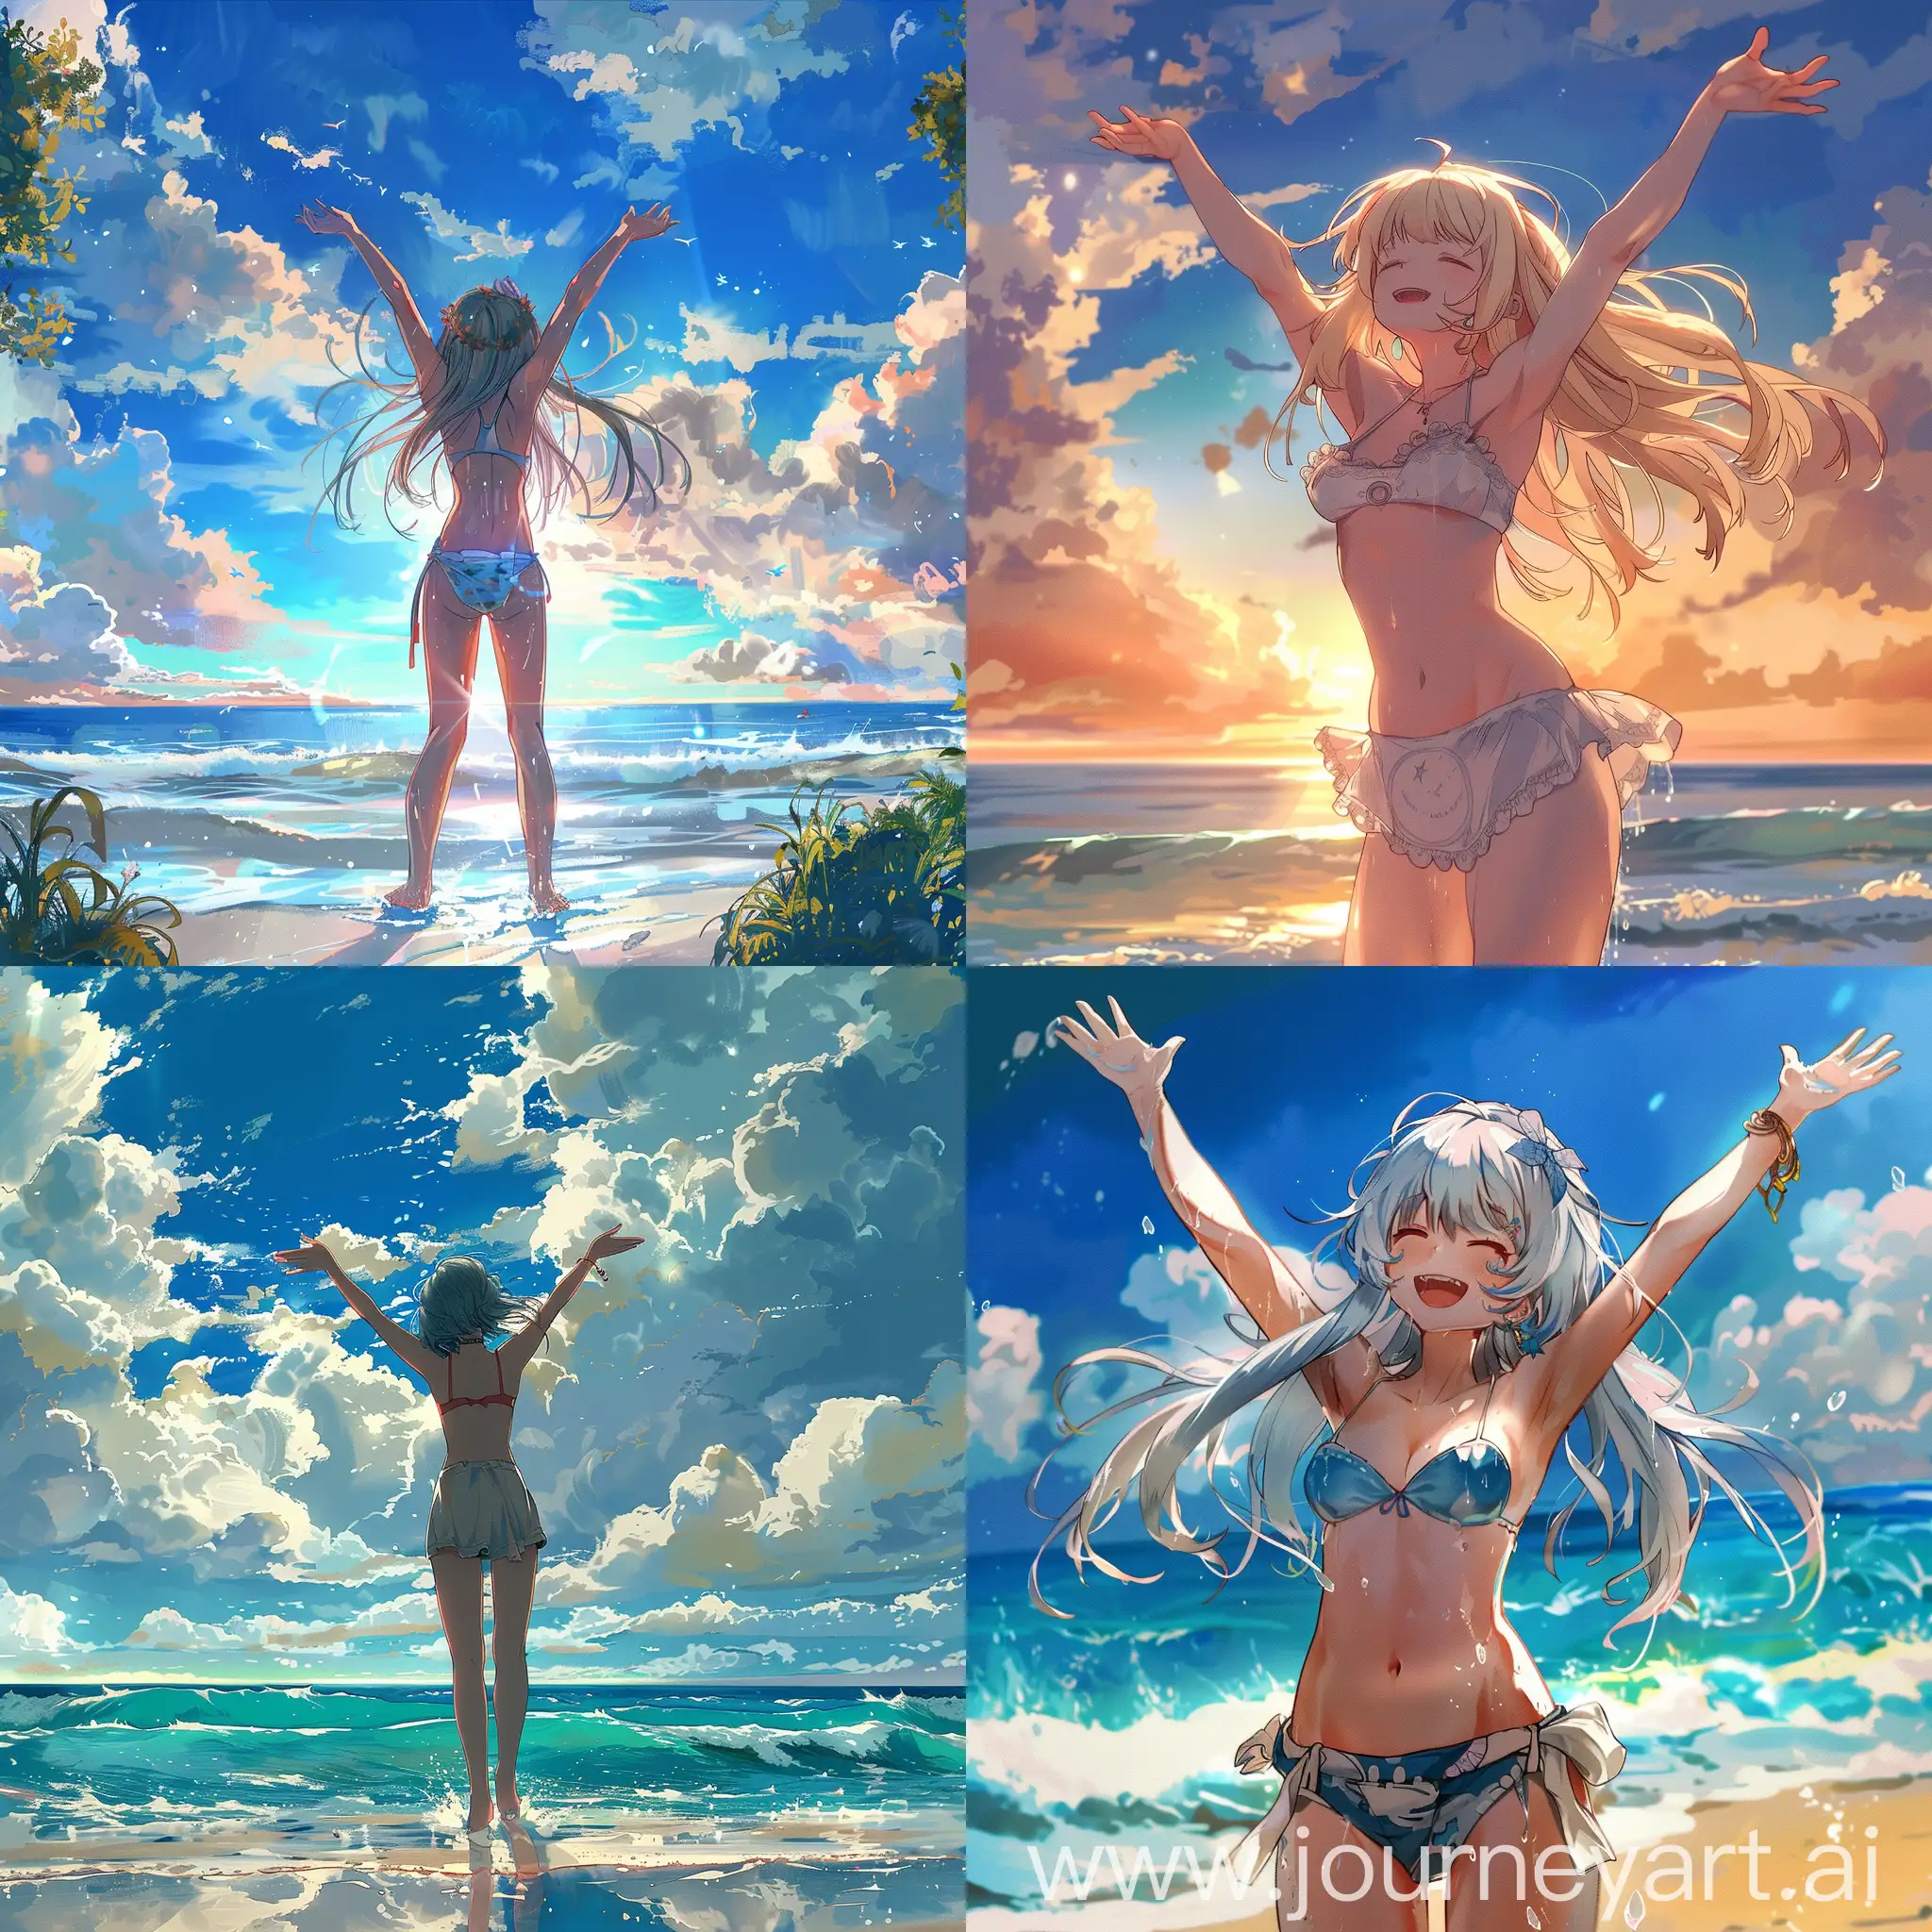 Anime-Girl-Celebrating-on-the-Beach-with-Raised-Arms